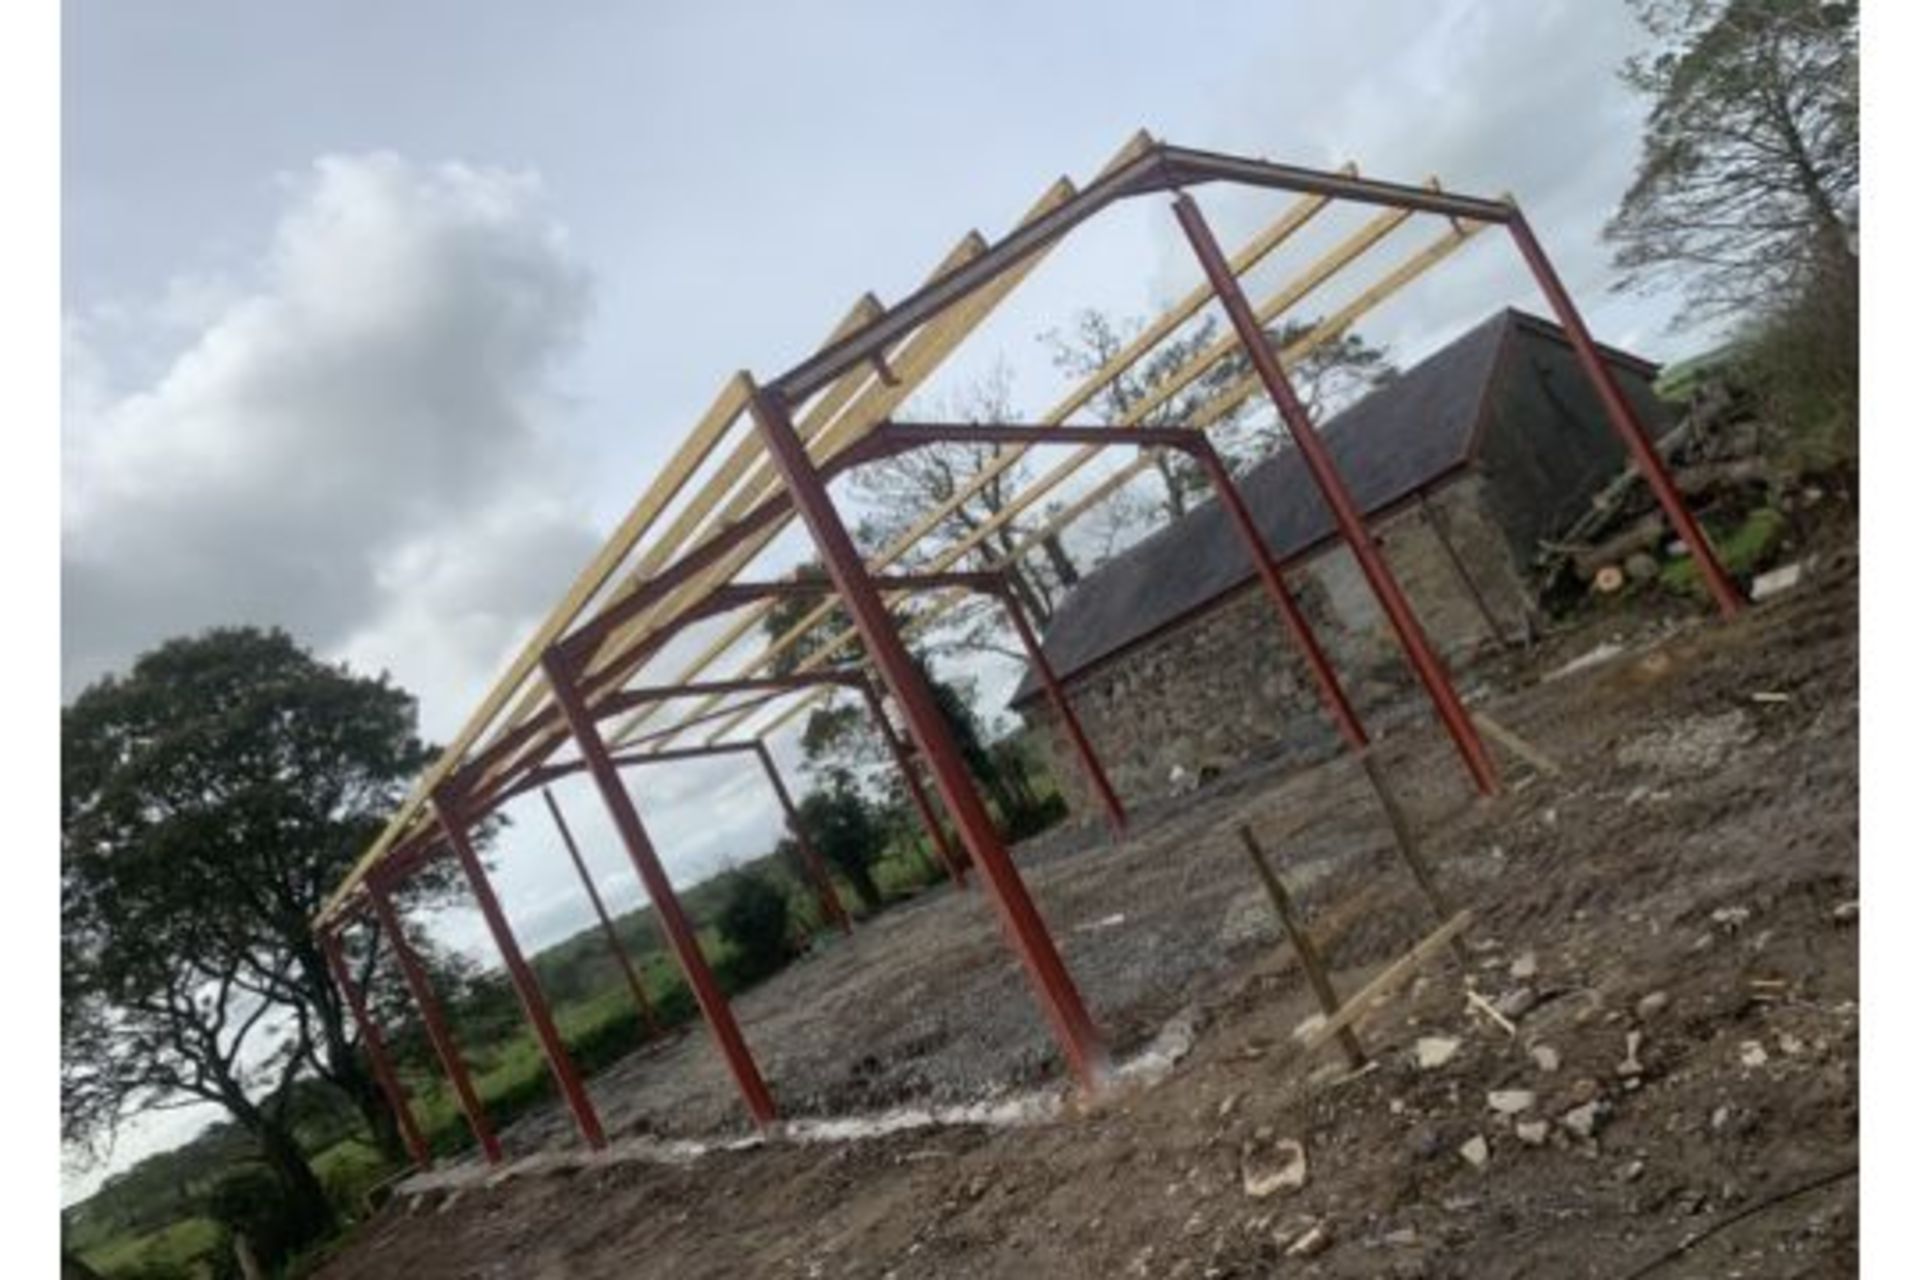 47 X 30 X 16 STEEL SHED FRAME BRAND NEW - Image 3 of 3